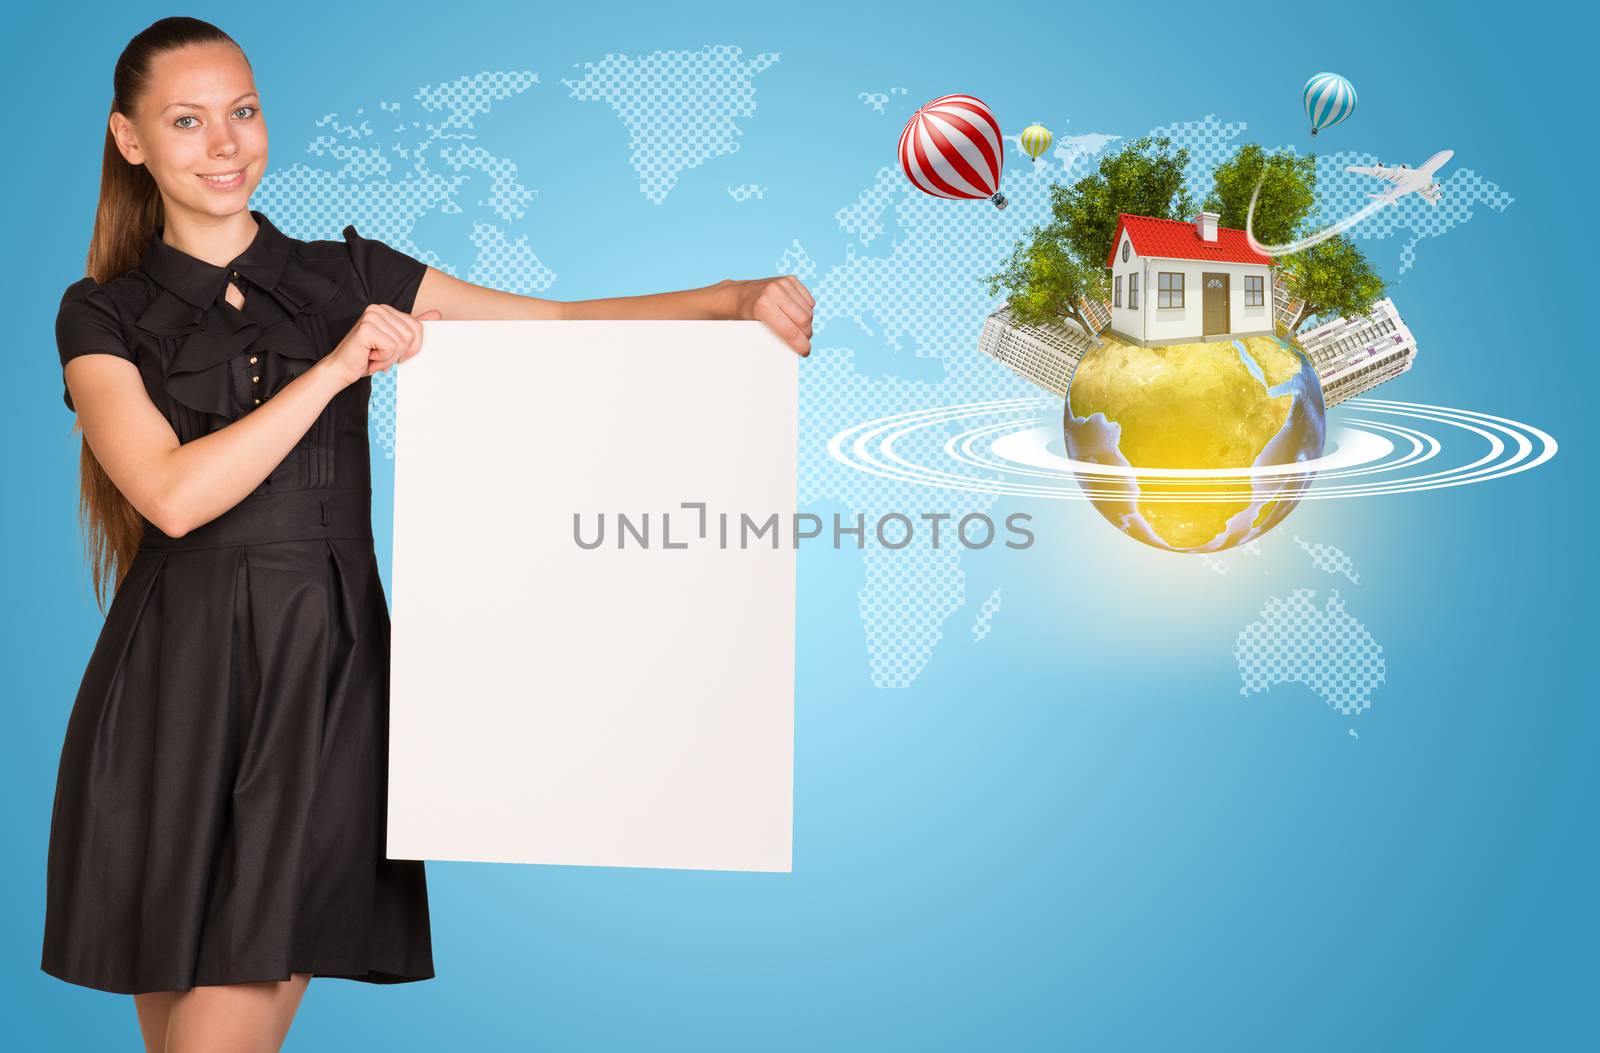 Beautiful businesswoman holding blank paper sheet. Beside is miniature Earth with trees, small house, high-rise buildings, air balloons, airplane, and surrounded by rings.  Contoured world map as backdrop